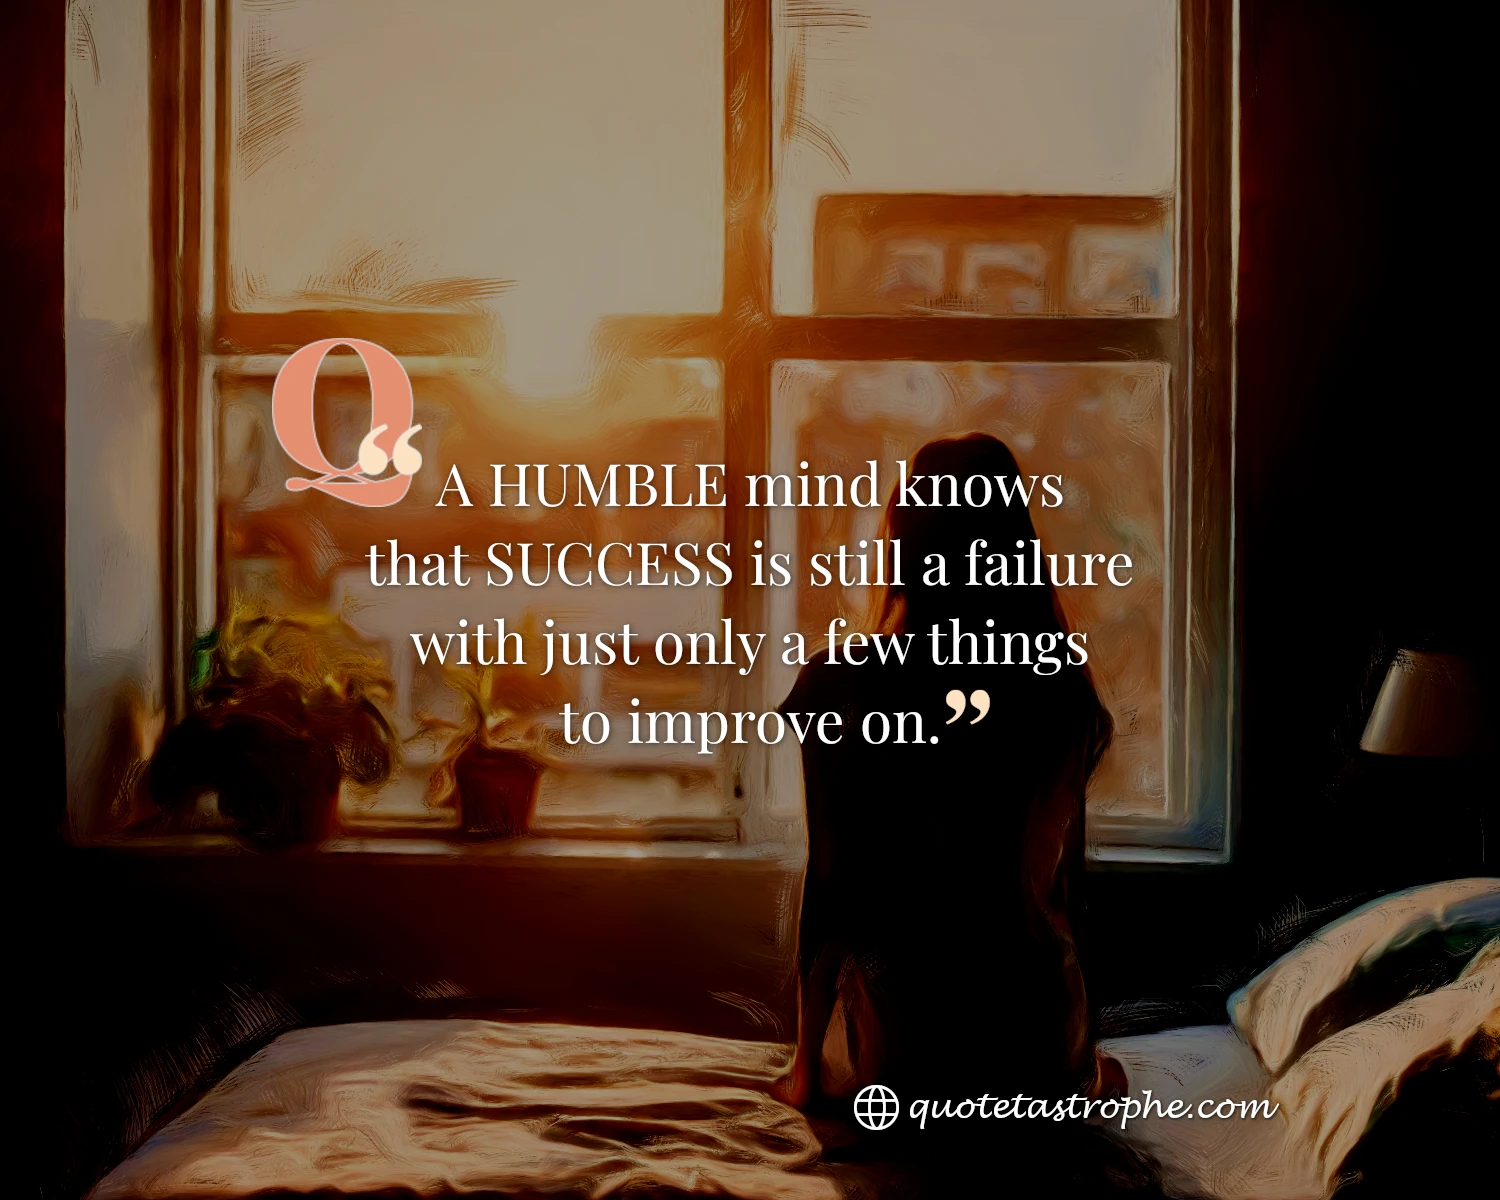 Success is Still a Failure With Just a Few Things to Improve